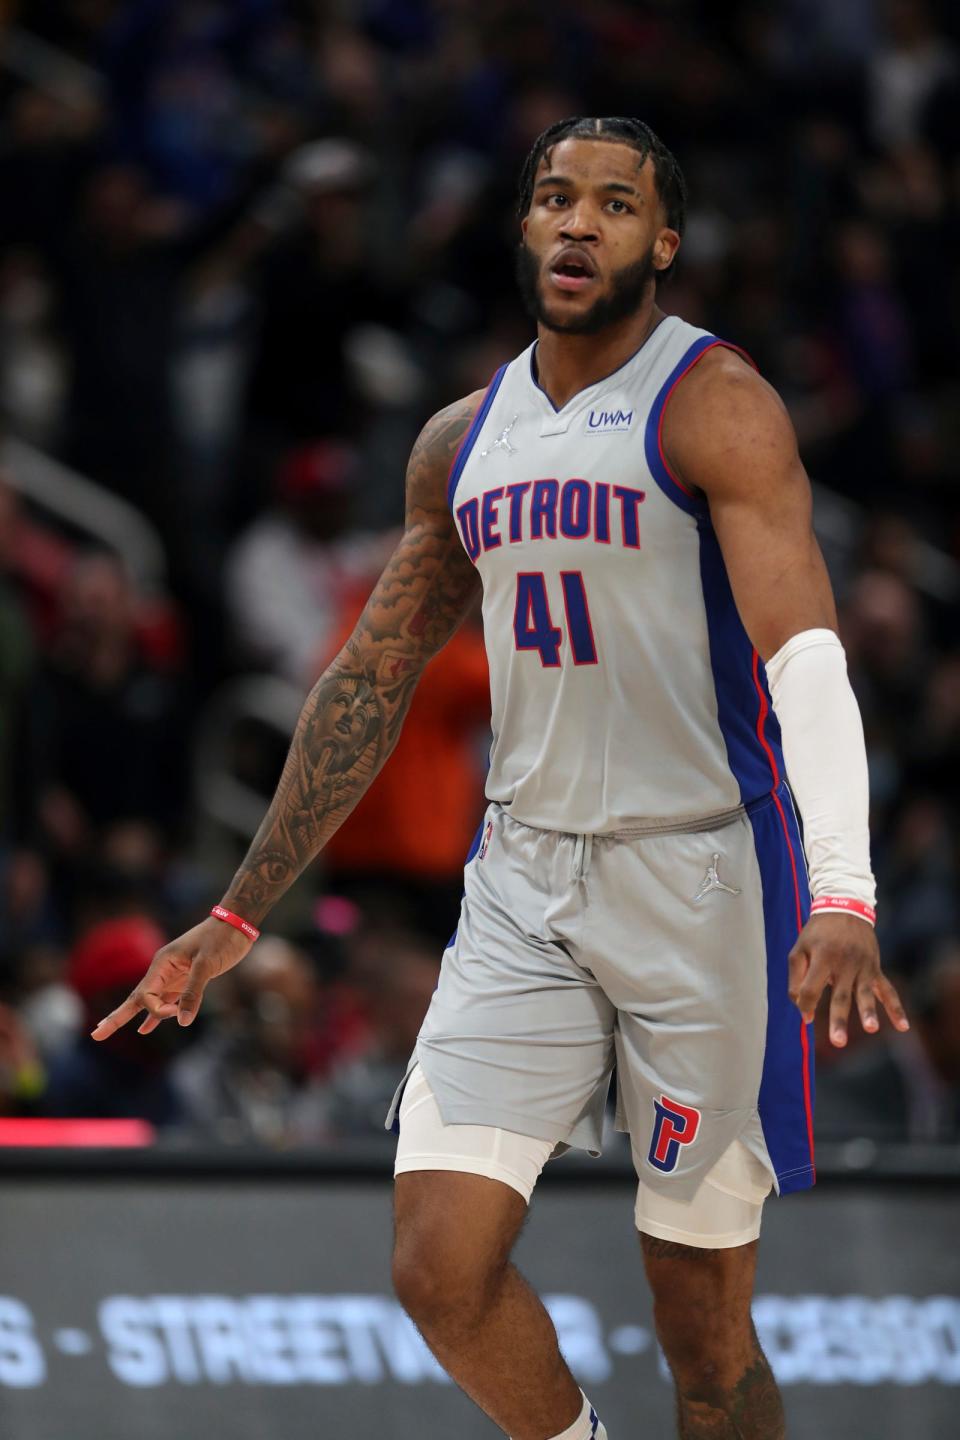 Detroit Pistons forward Saddiq Bey reacts after a 3-pointer against the Philadelphia 76ers during the fourth quarter Thursday, March 31, 2022, at Little Caesars Arena in Detroit.